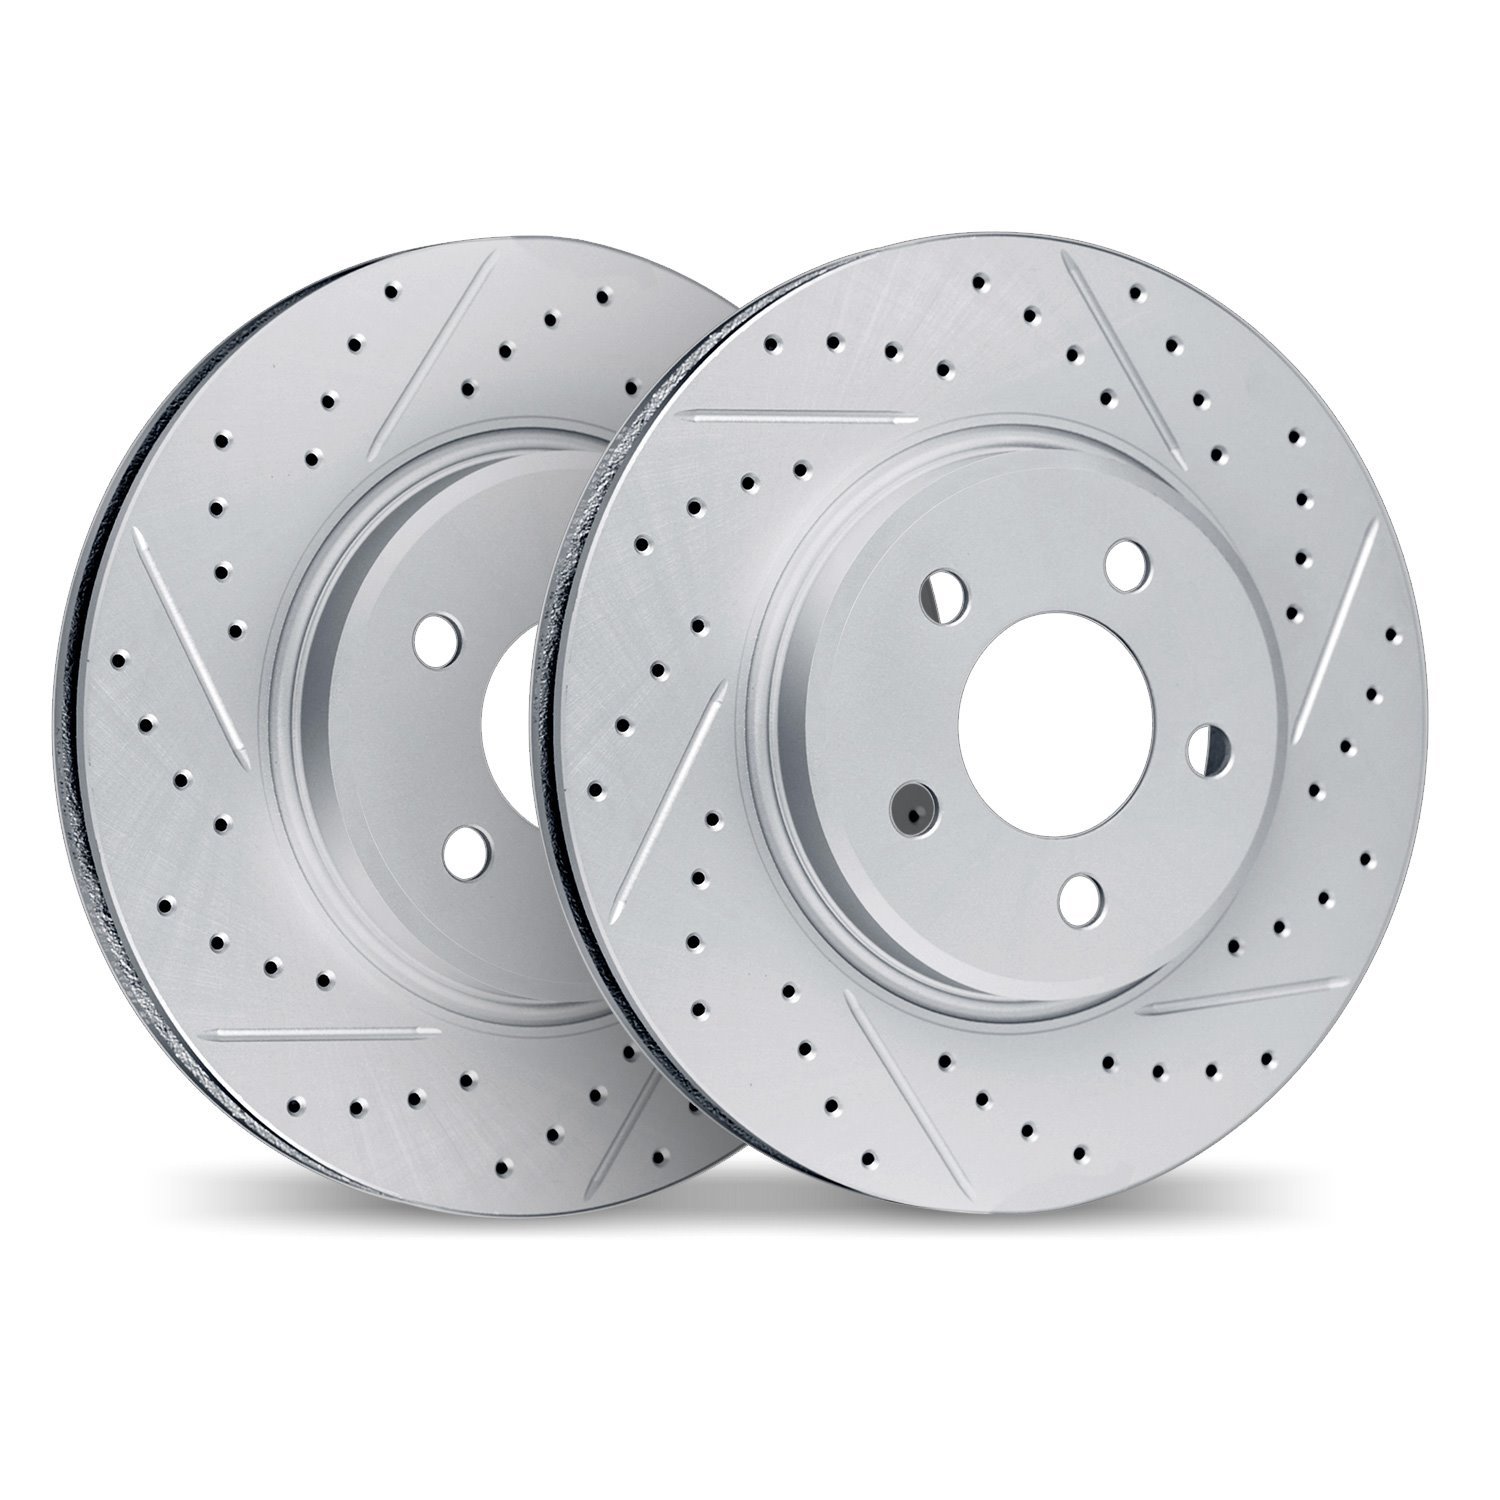 2002-27017 Geoperformance Drilled/Slotted Brake Rotors, 2016-2017 Volvo, Position: Front